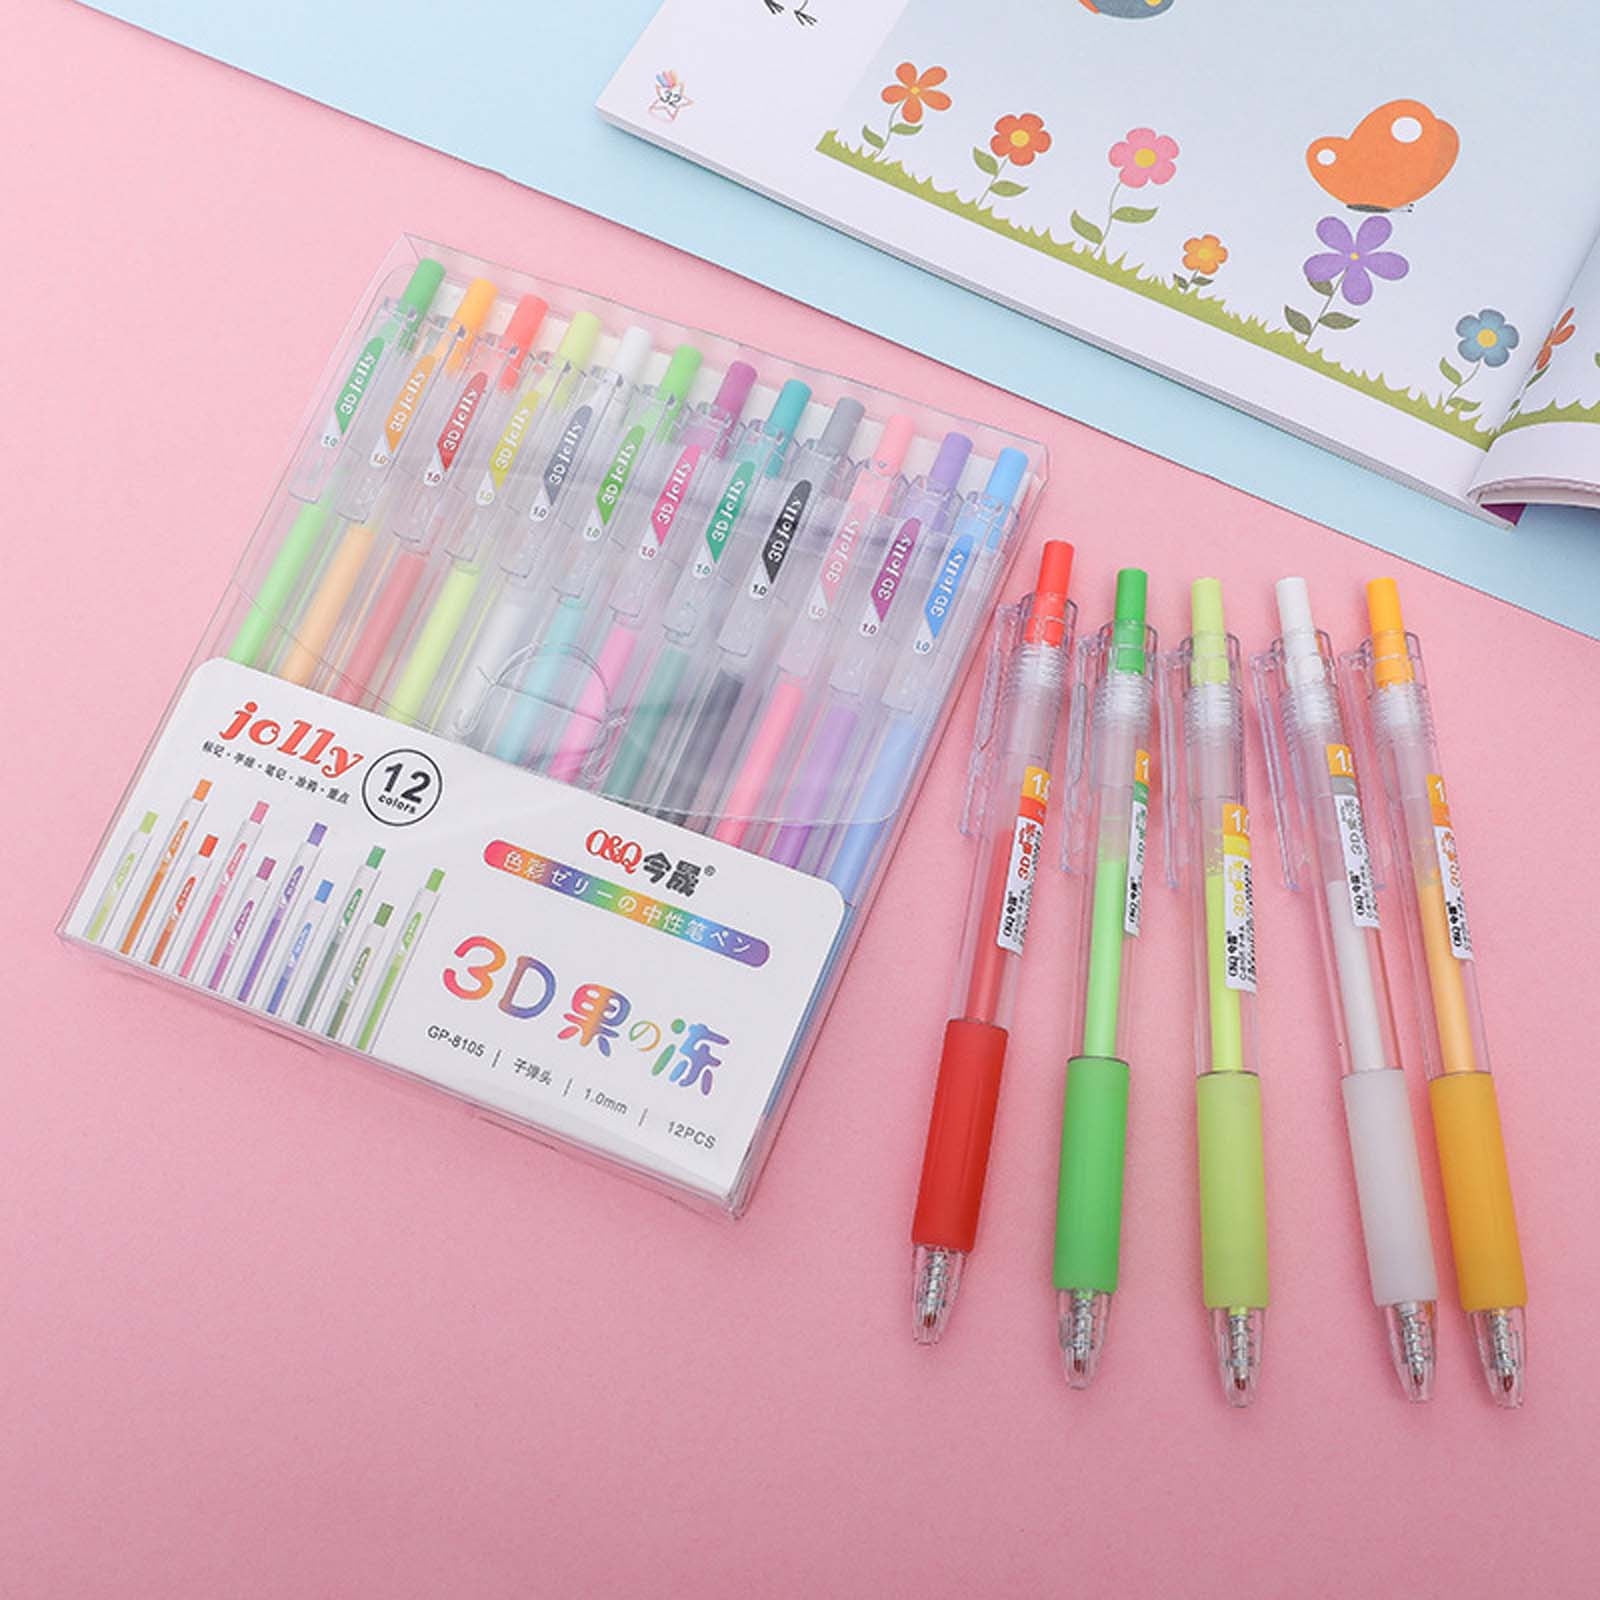 Lzobxe School Supplies Clearance Paint Markers 20pc Multifunctional DIY Graffiti Pen, Easy to Write and Easy to Erase Marker Pen2ml, Size: One Size